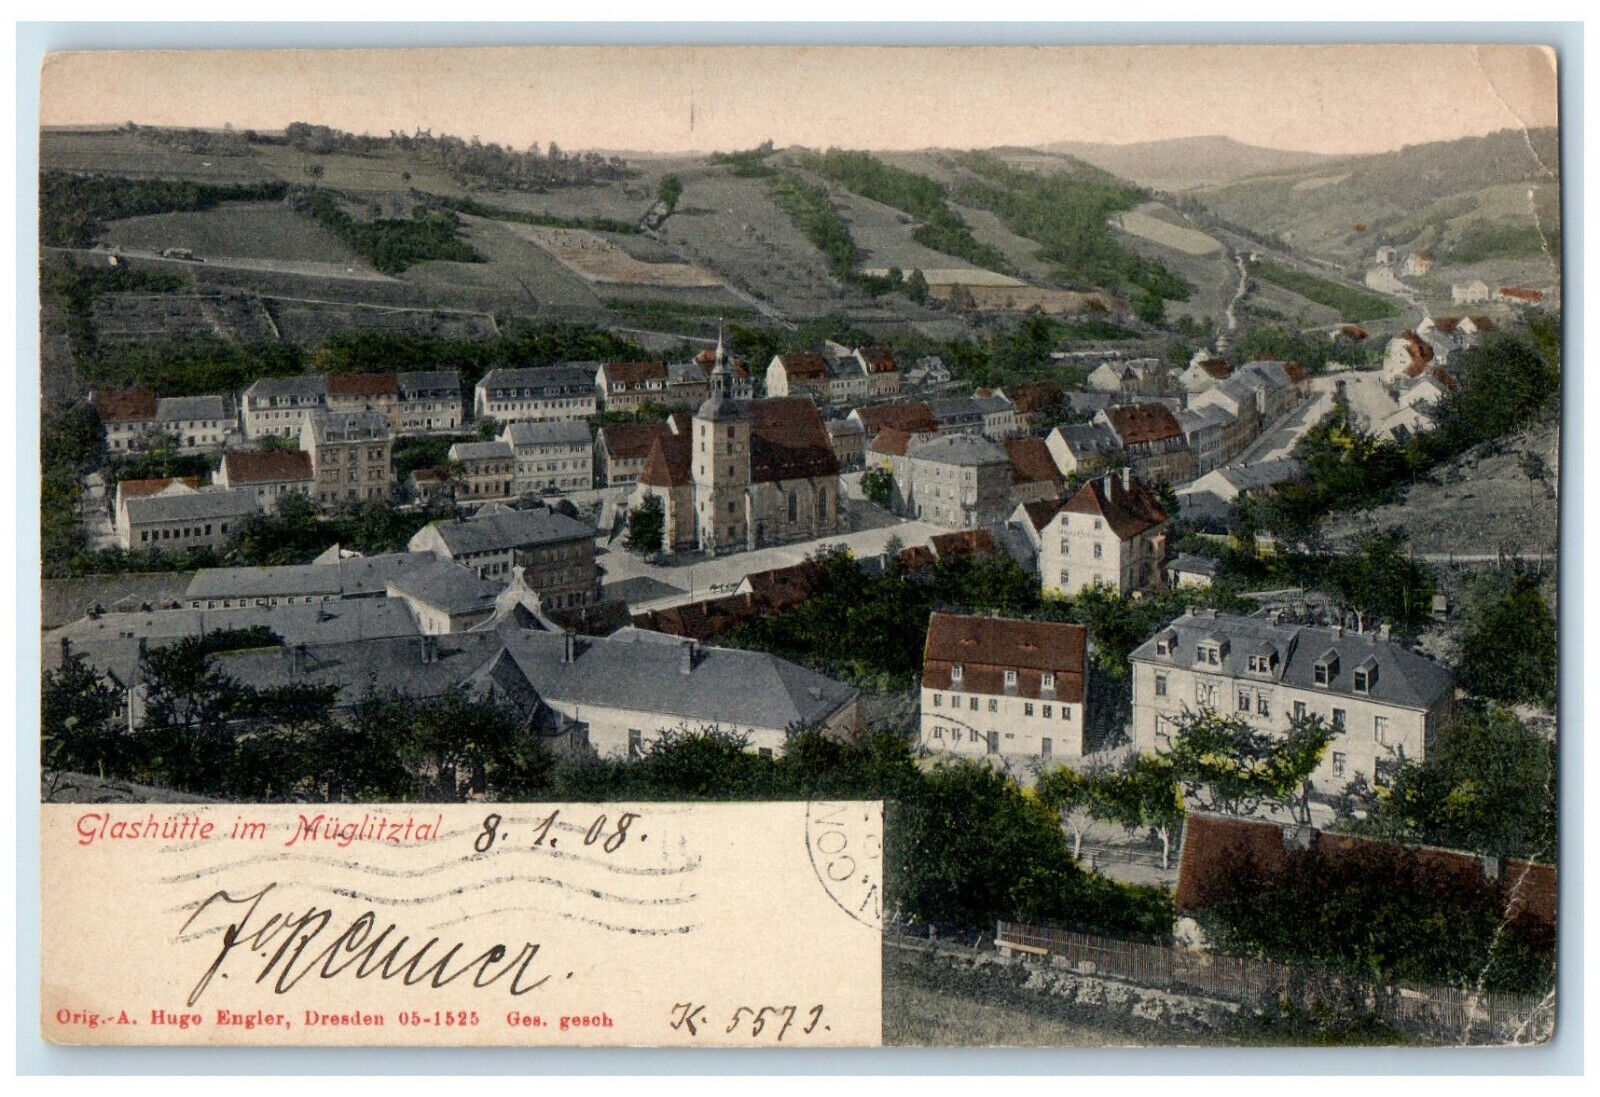 1908 Glass shell in the Muglitztal Saxony Germany Posted Antique Postcard